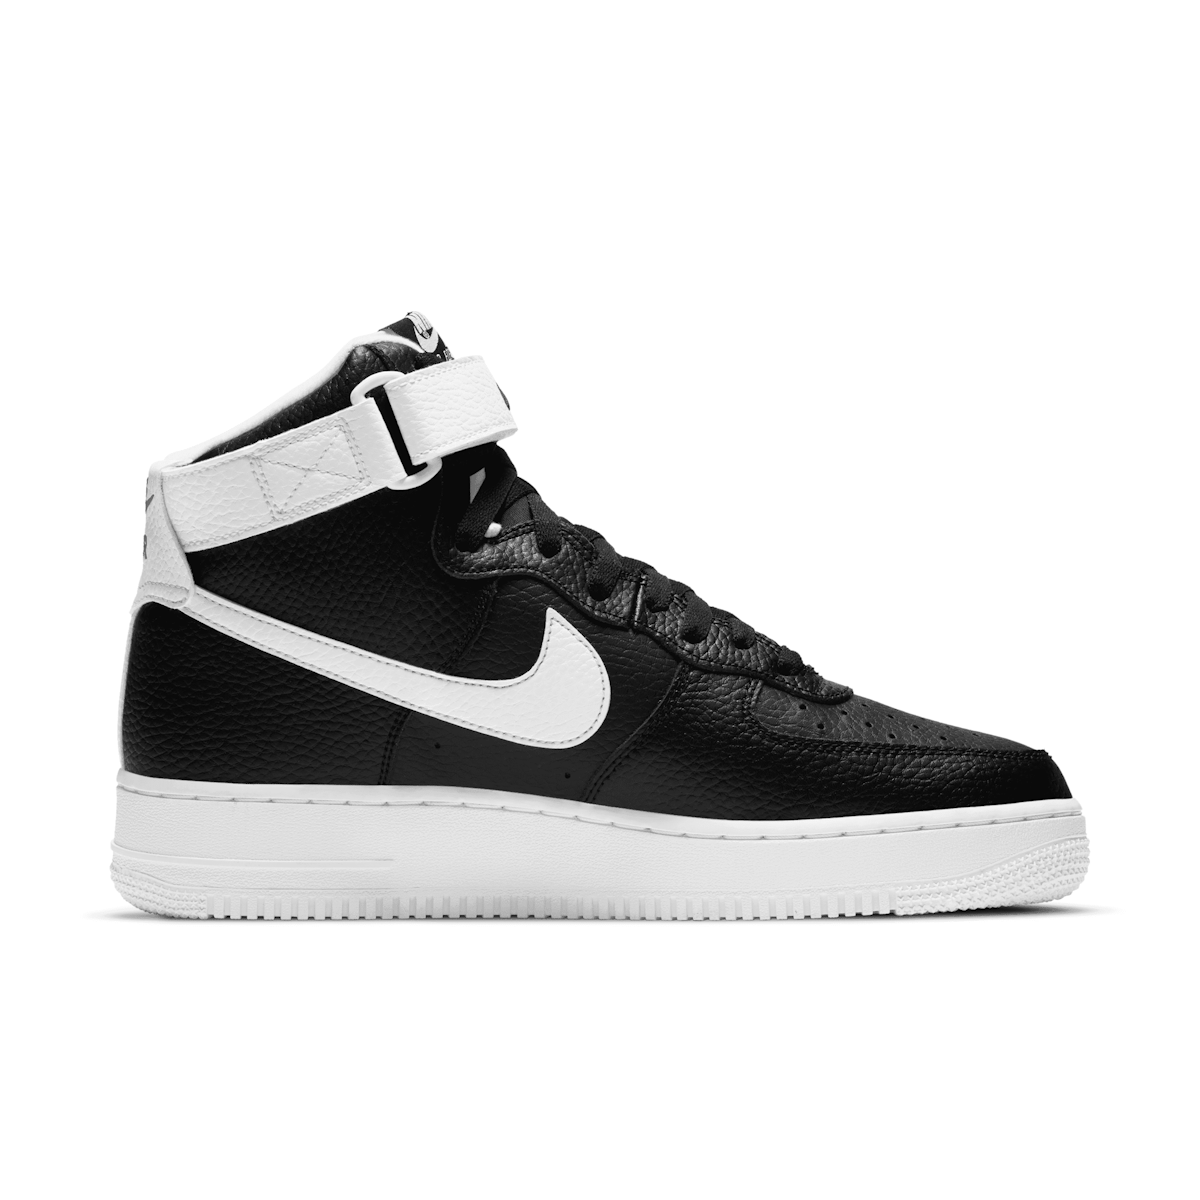 Nike Air Force 1 High Black White - CT2303-002 Raffles and Release 